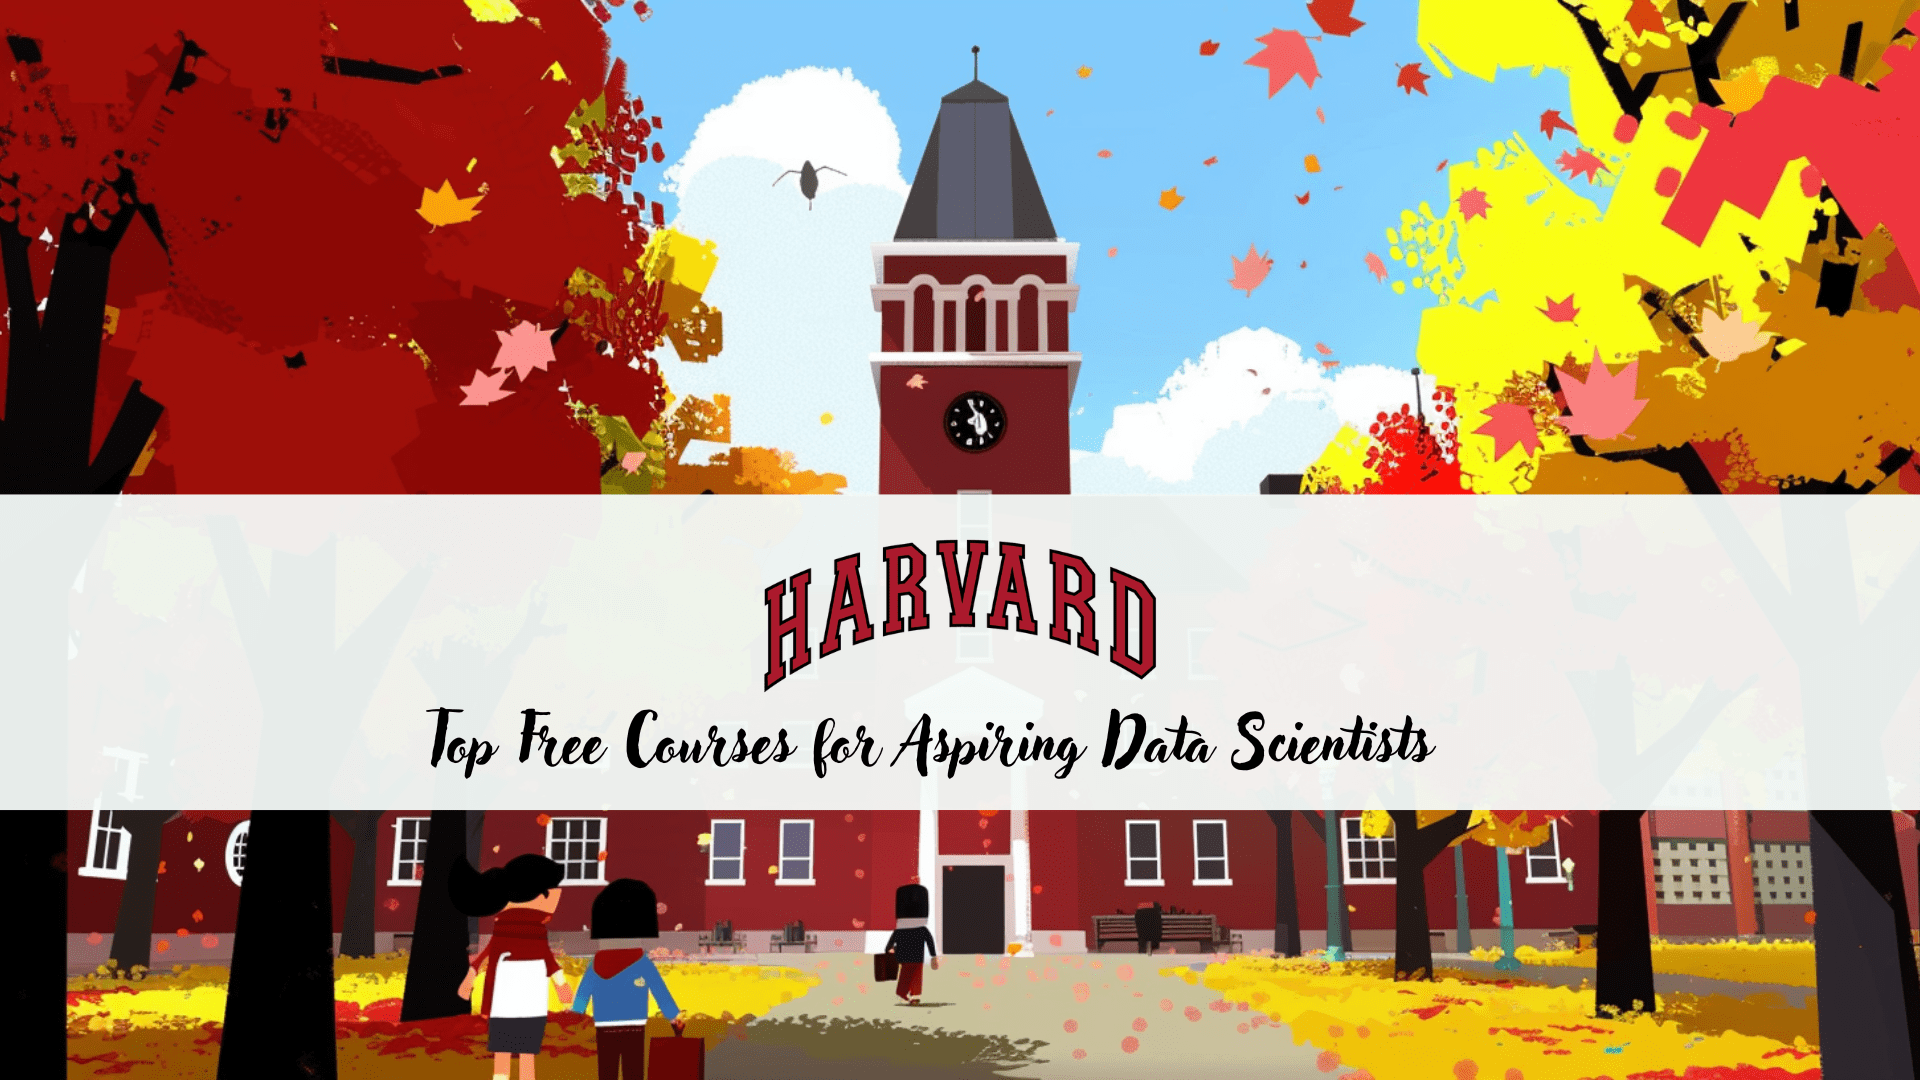 Harvard's Top Free Courses for Aspiring Data Scientists